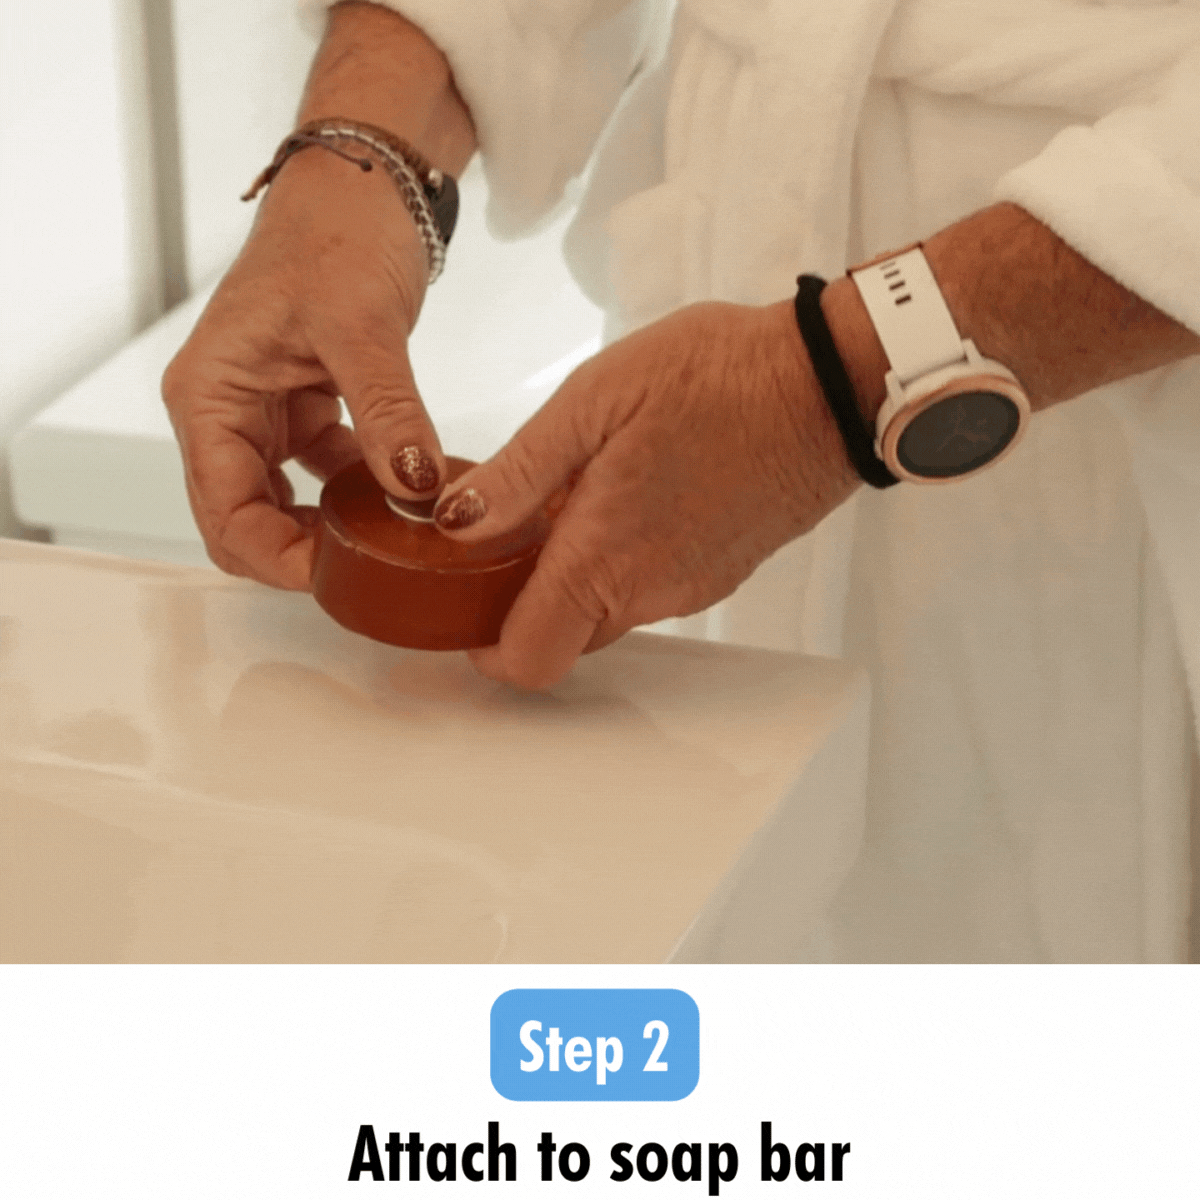 Step 2 of Mirai Clinical magnet usage guide: Demonstrating the correct technique to firmly attach the magnet to the soap bar, ensuring secure placement and prolonged soap life.